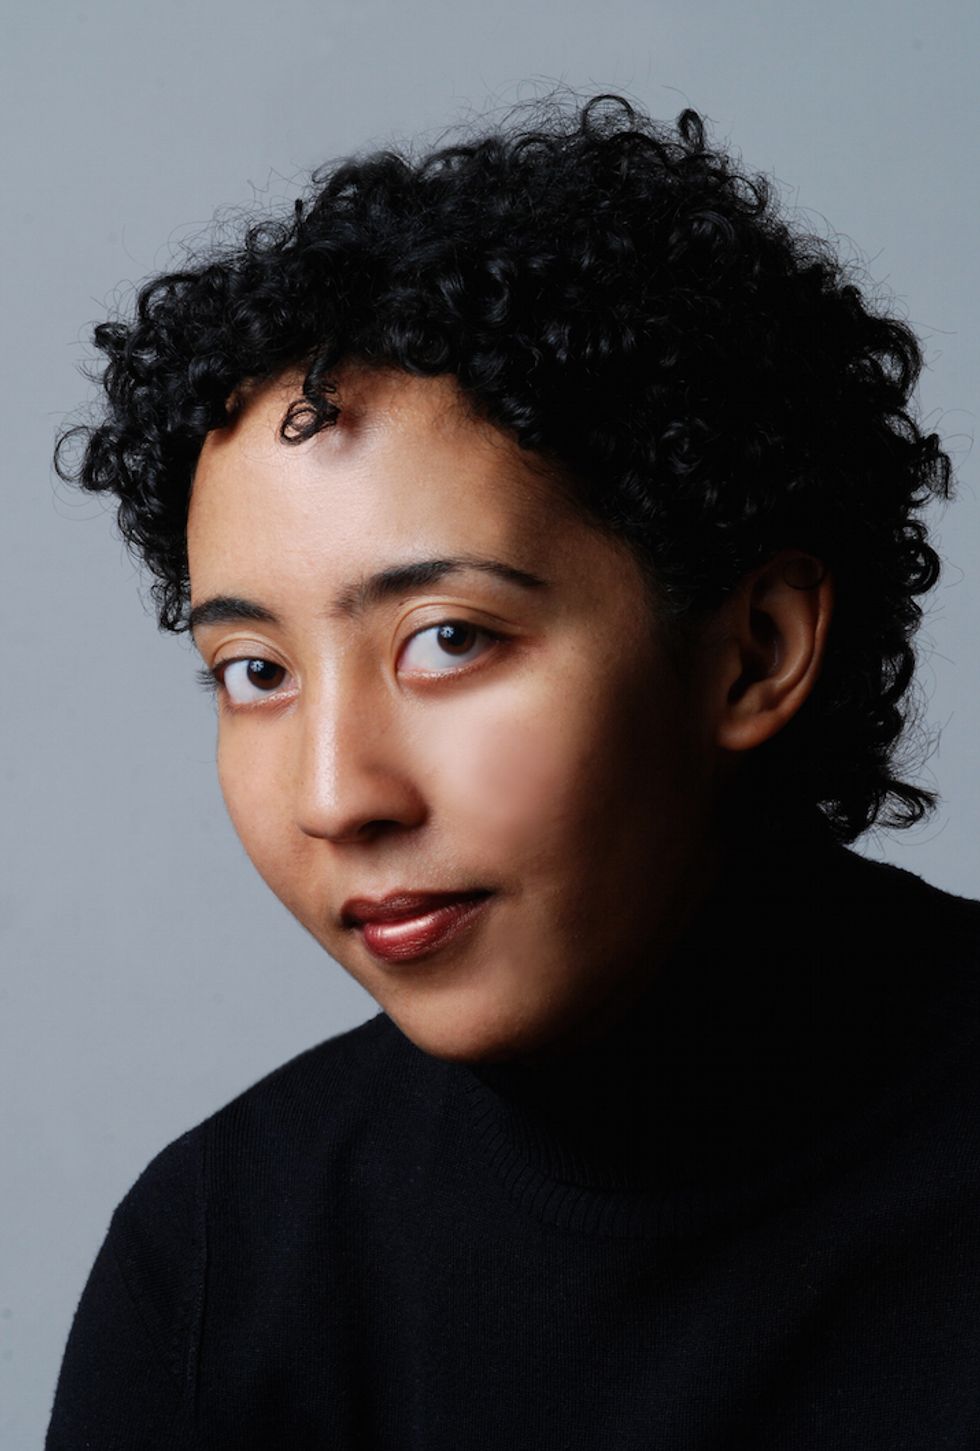 Zambia's Namwali Serpell Wins The 2015 Caine Prize For African Writing